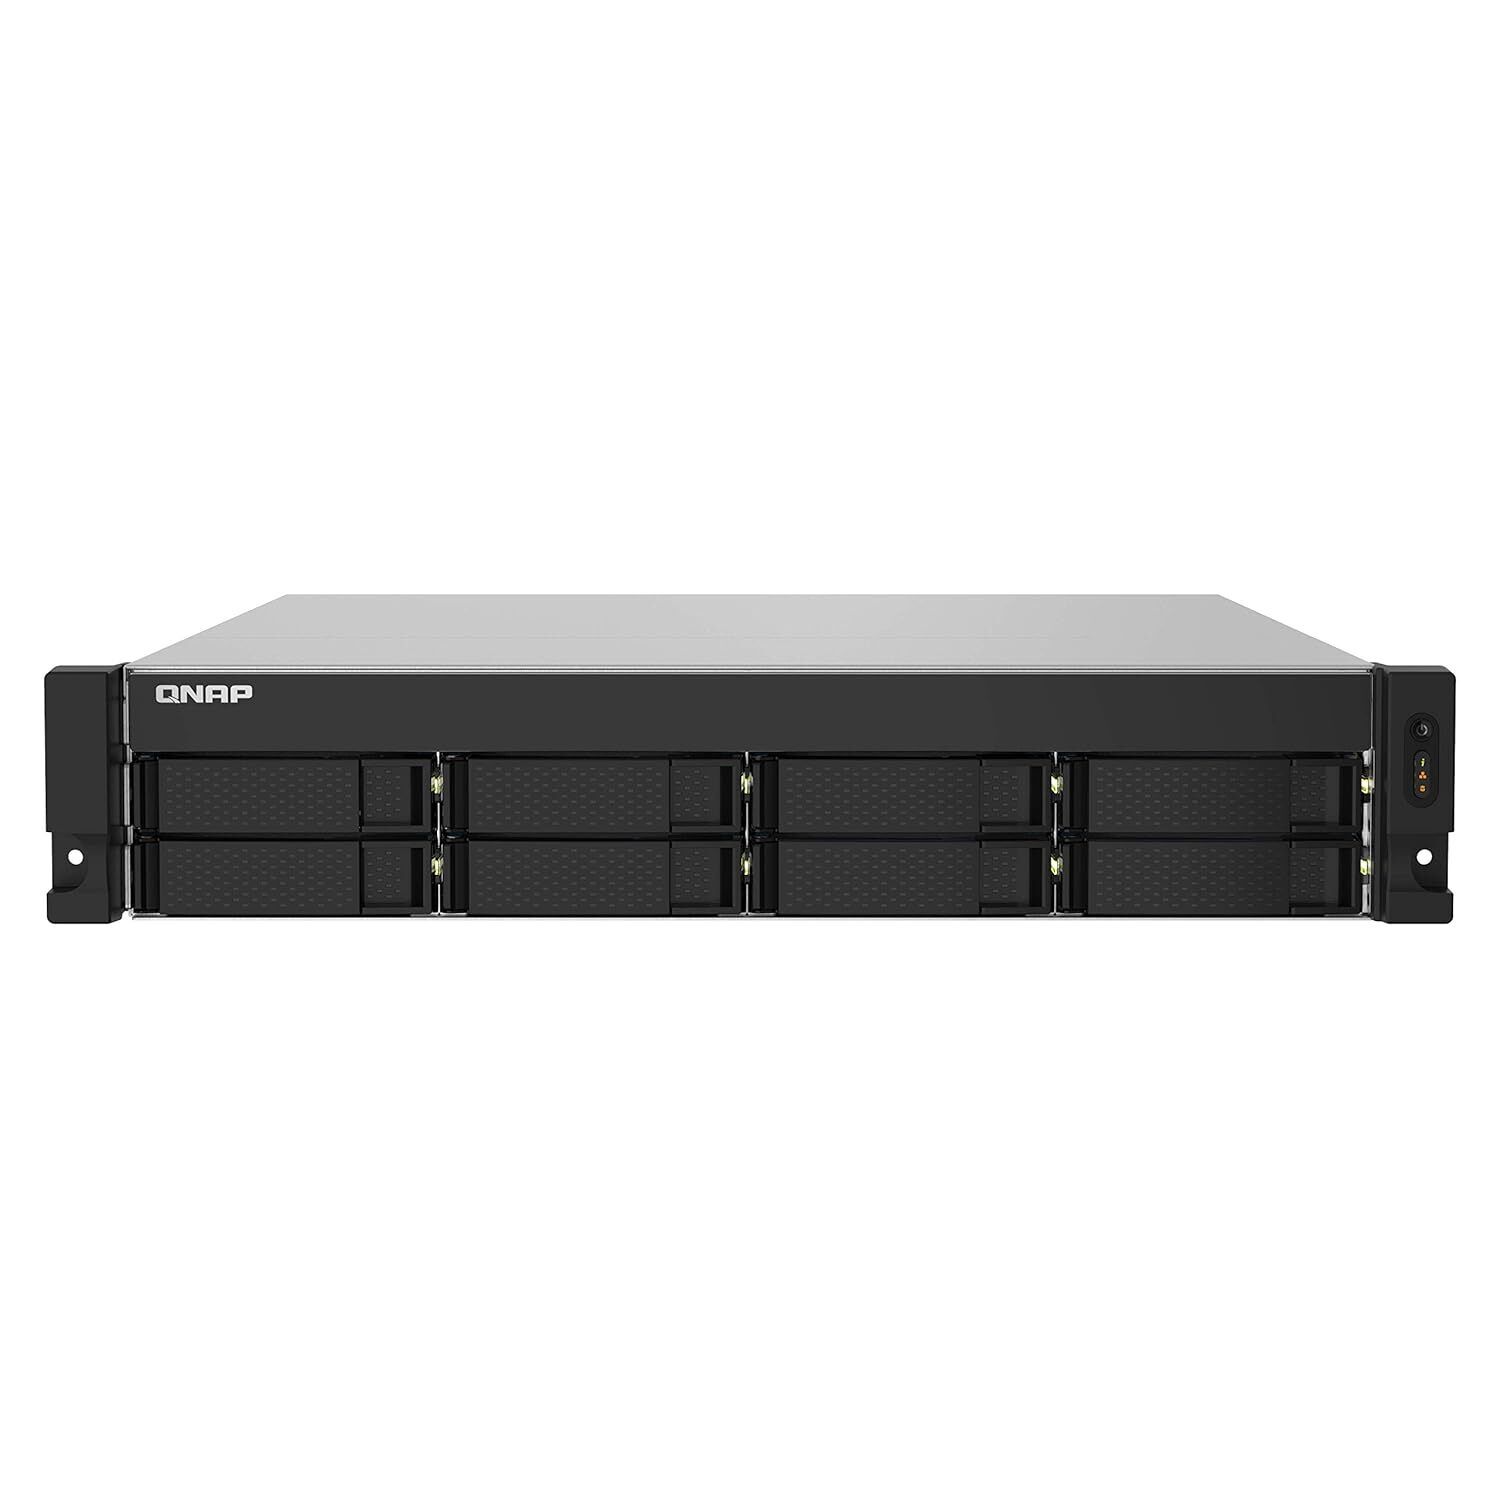 QNAP TS-832PXU-RP-4G 8 Bay High-Speed SMB Rackmount NAS with Two 10GbE and 2.5